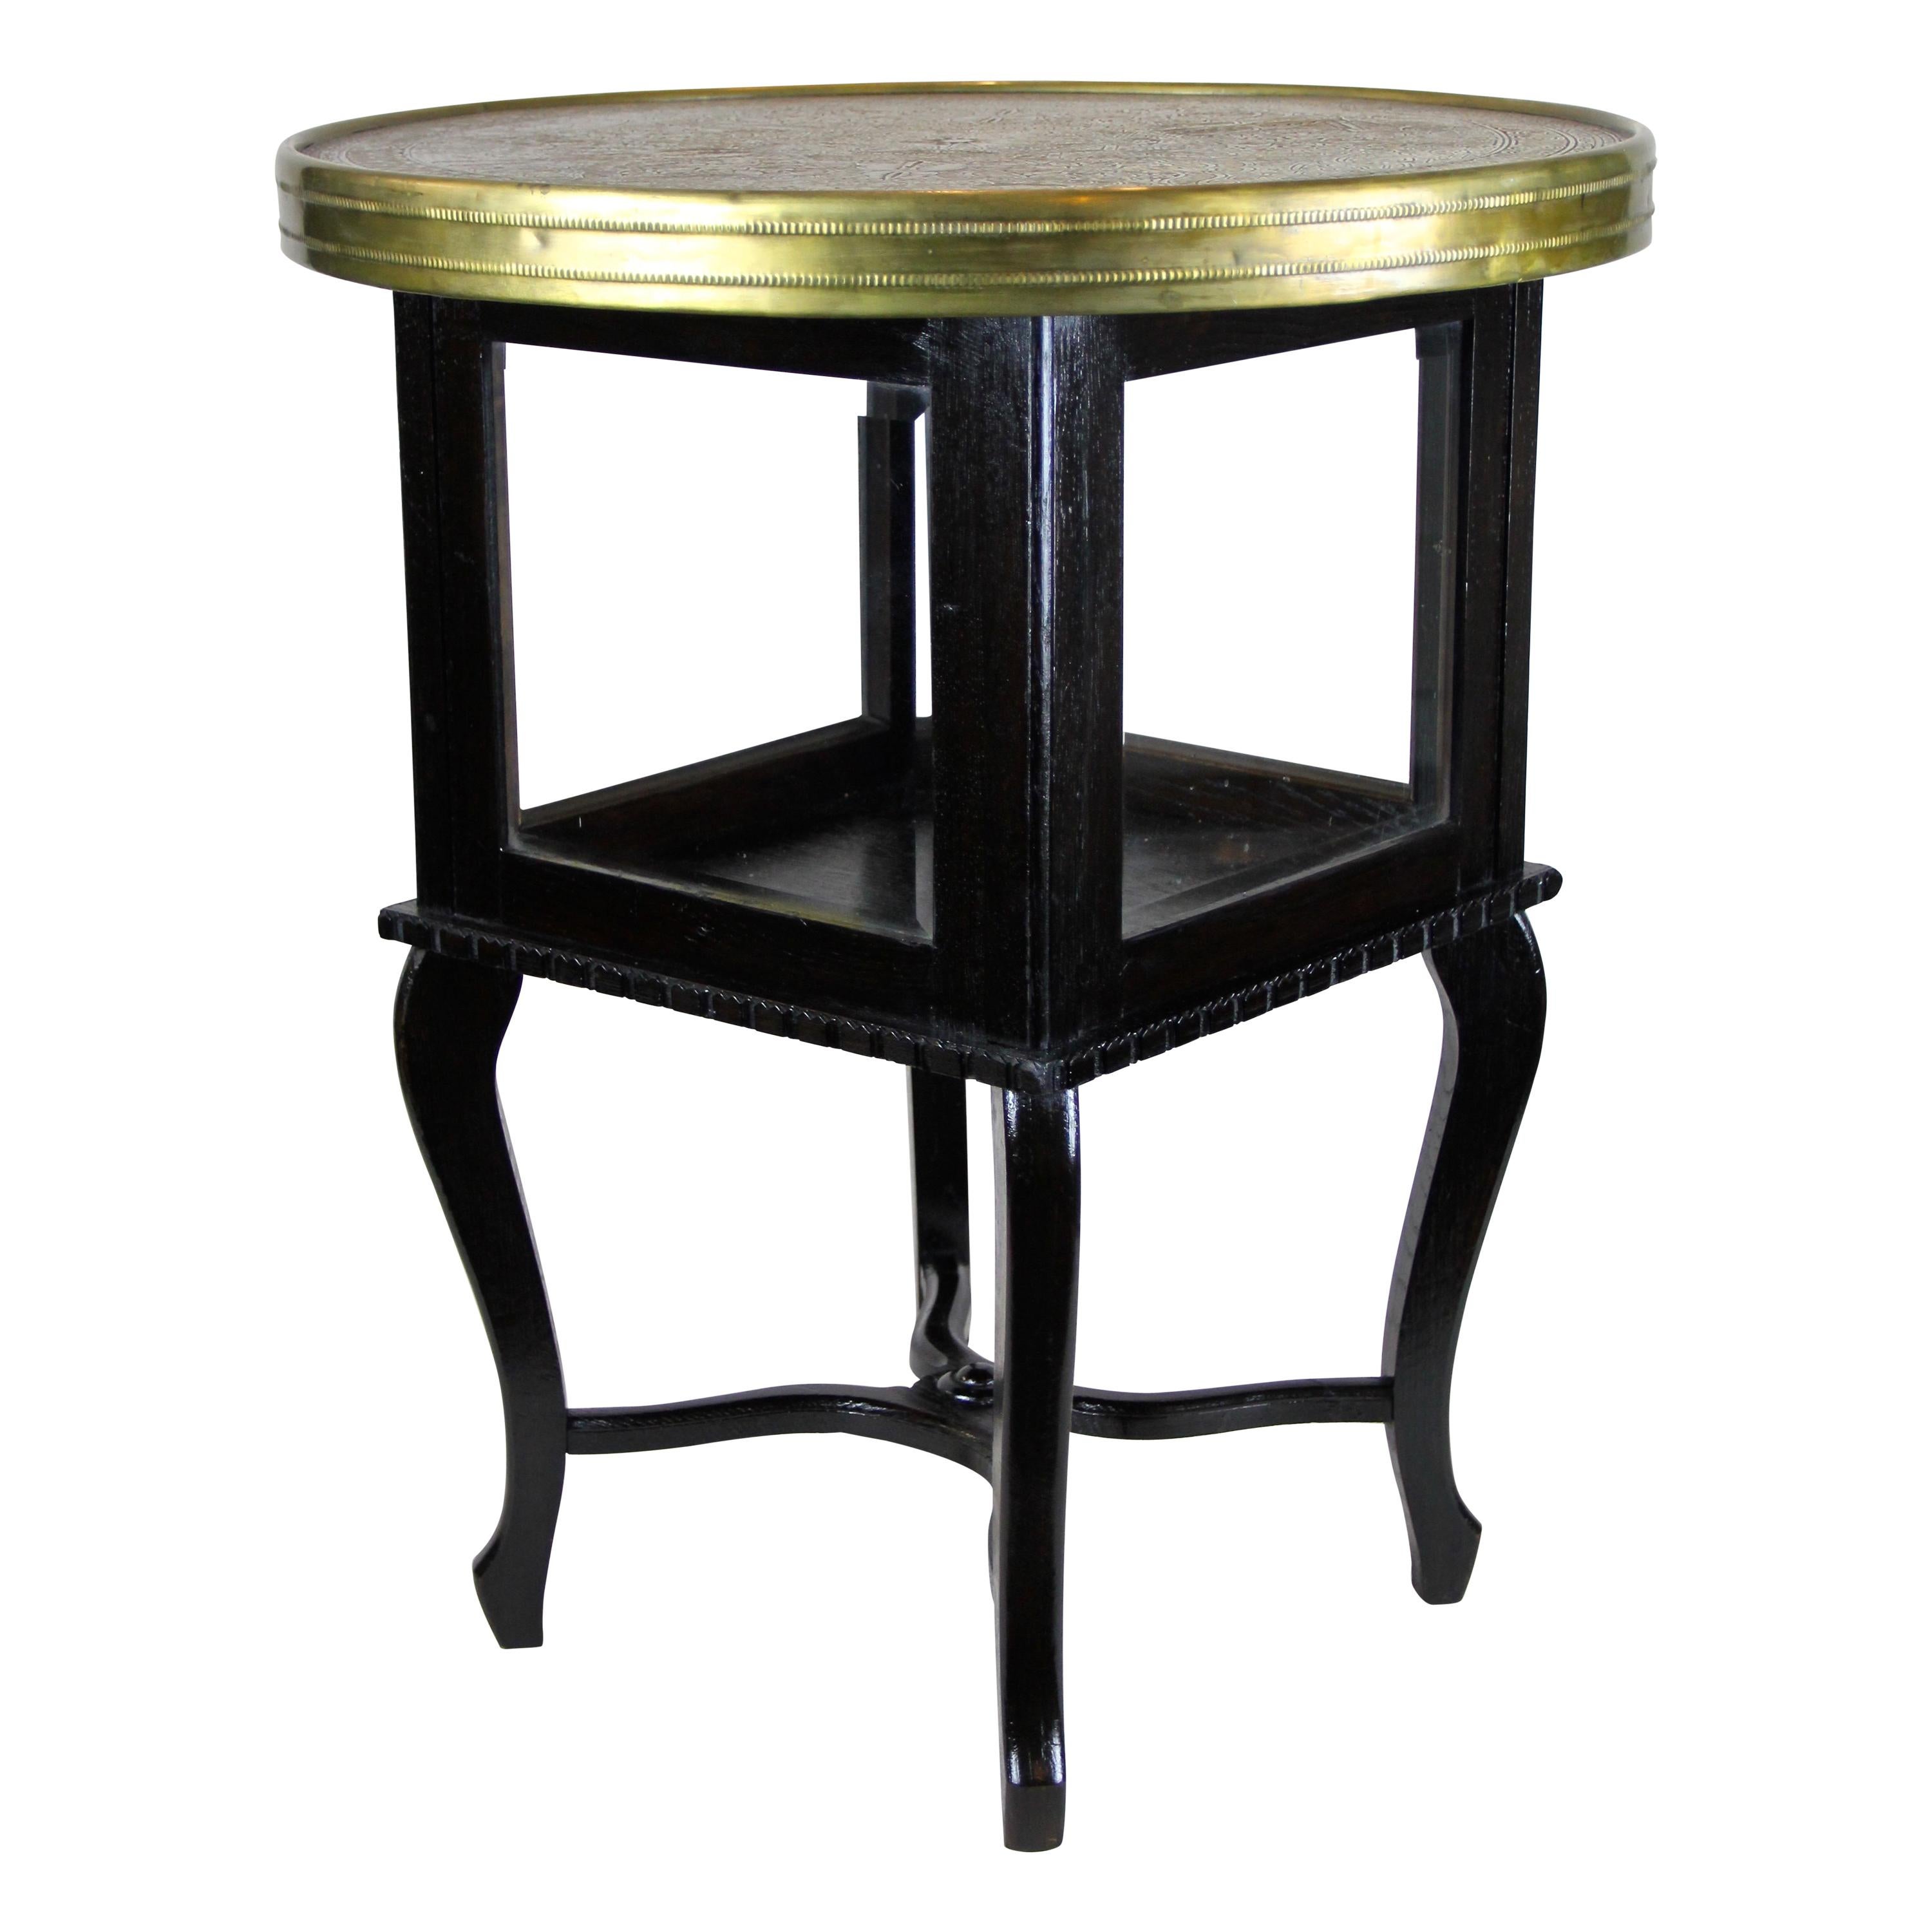 Art Deco Side Table with Ornamented Brass Table Top, Austria, circa 1920